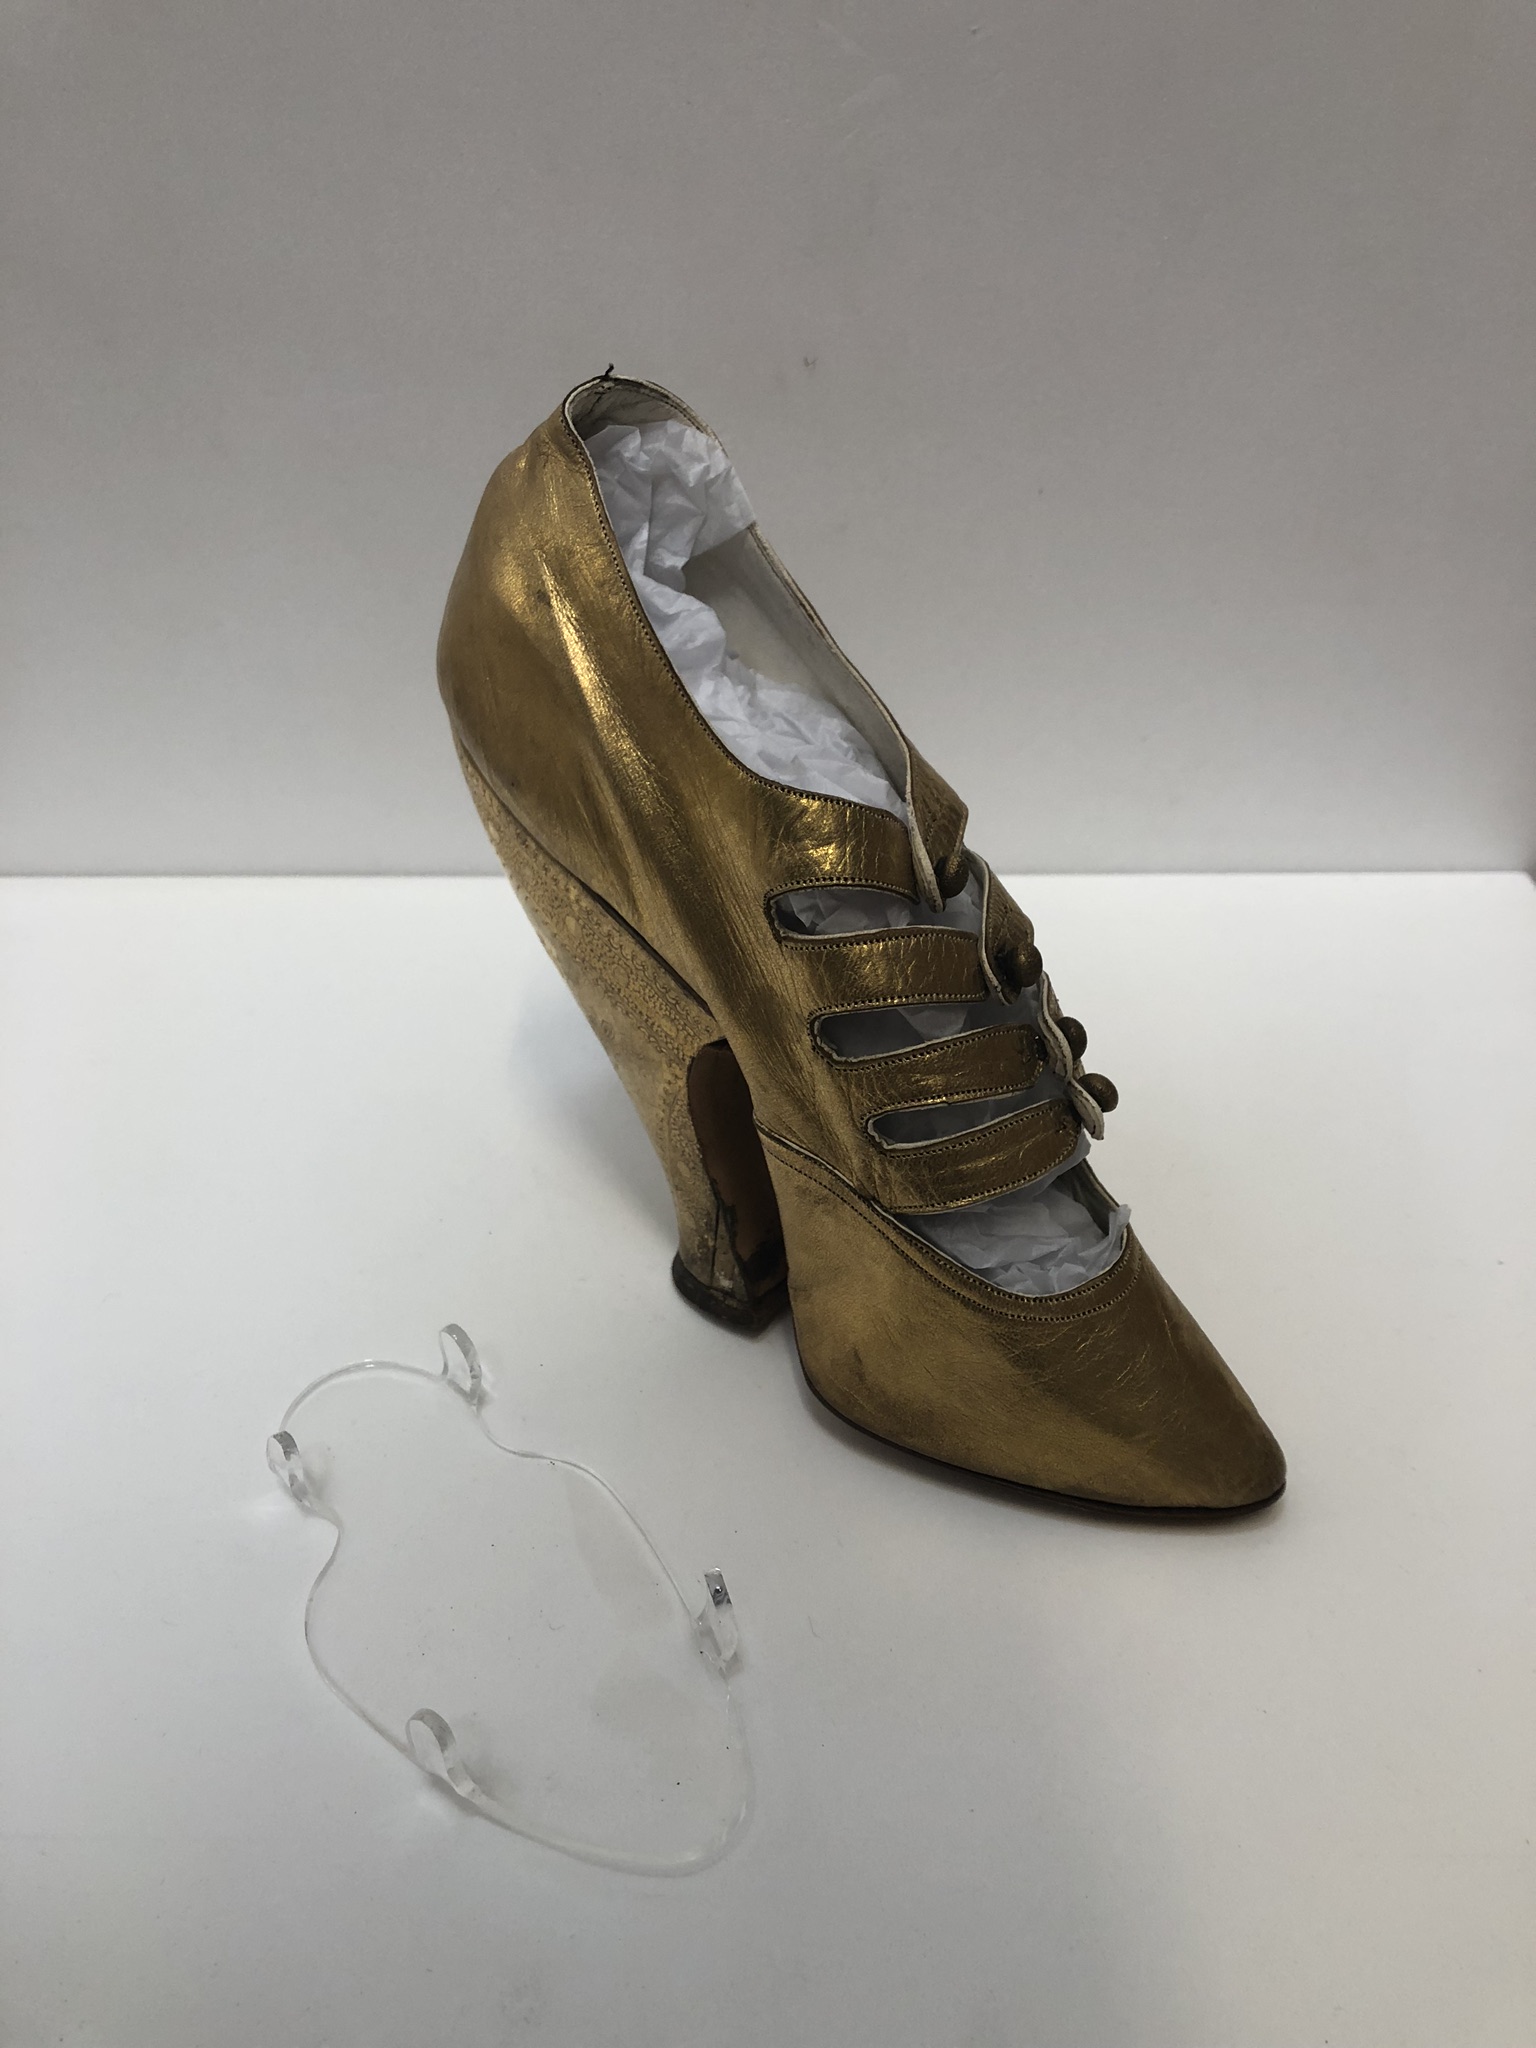 Mount for Shoe at Northampton Museum, object mounts, mount makers, projects